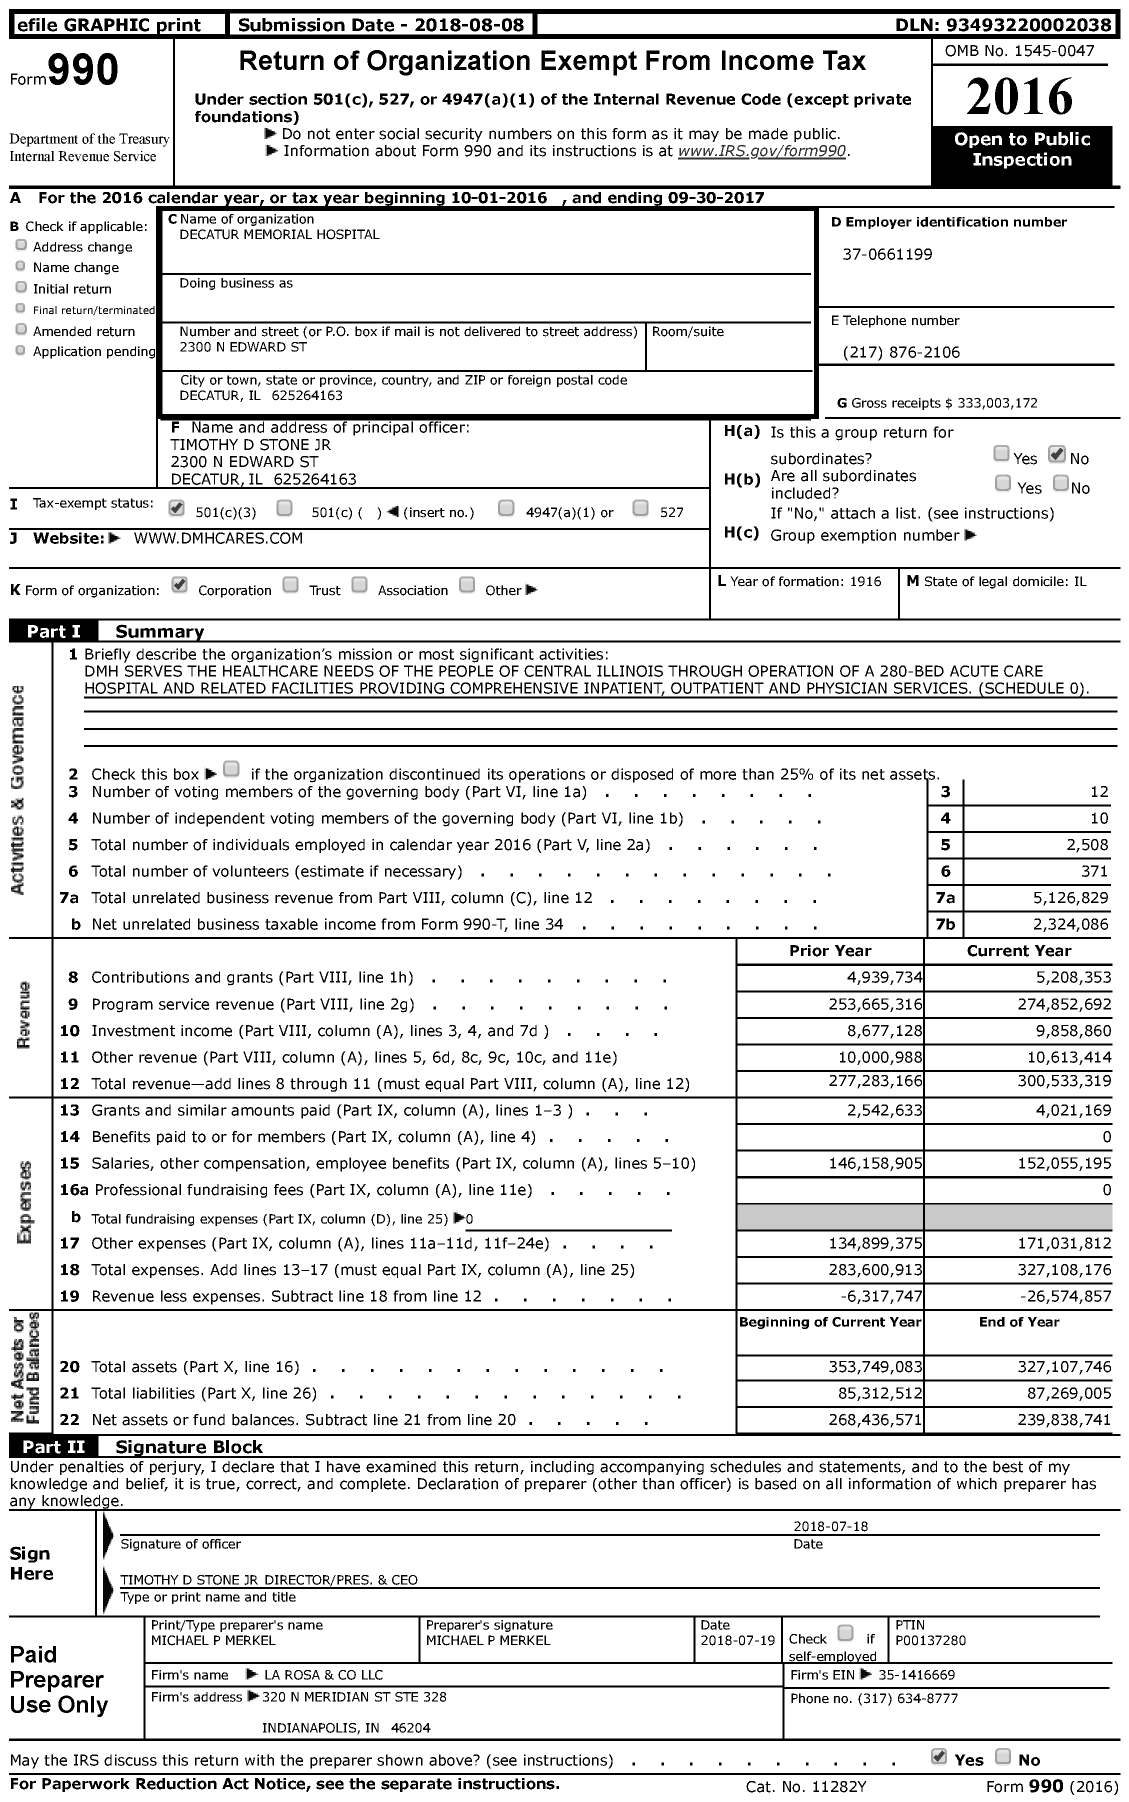 Image of first page of 2016 Form 990 for Decatur Memorial Hospital (DMH)